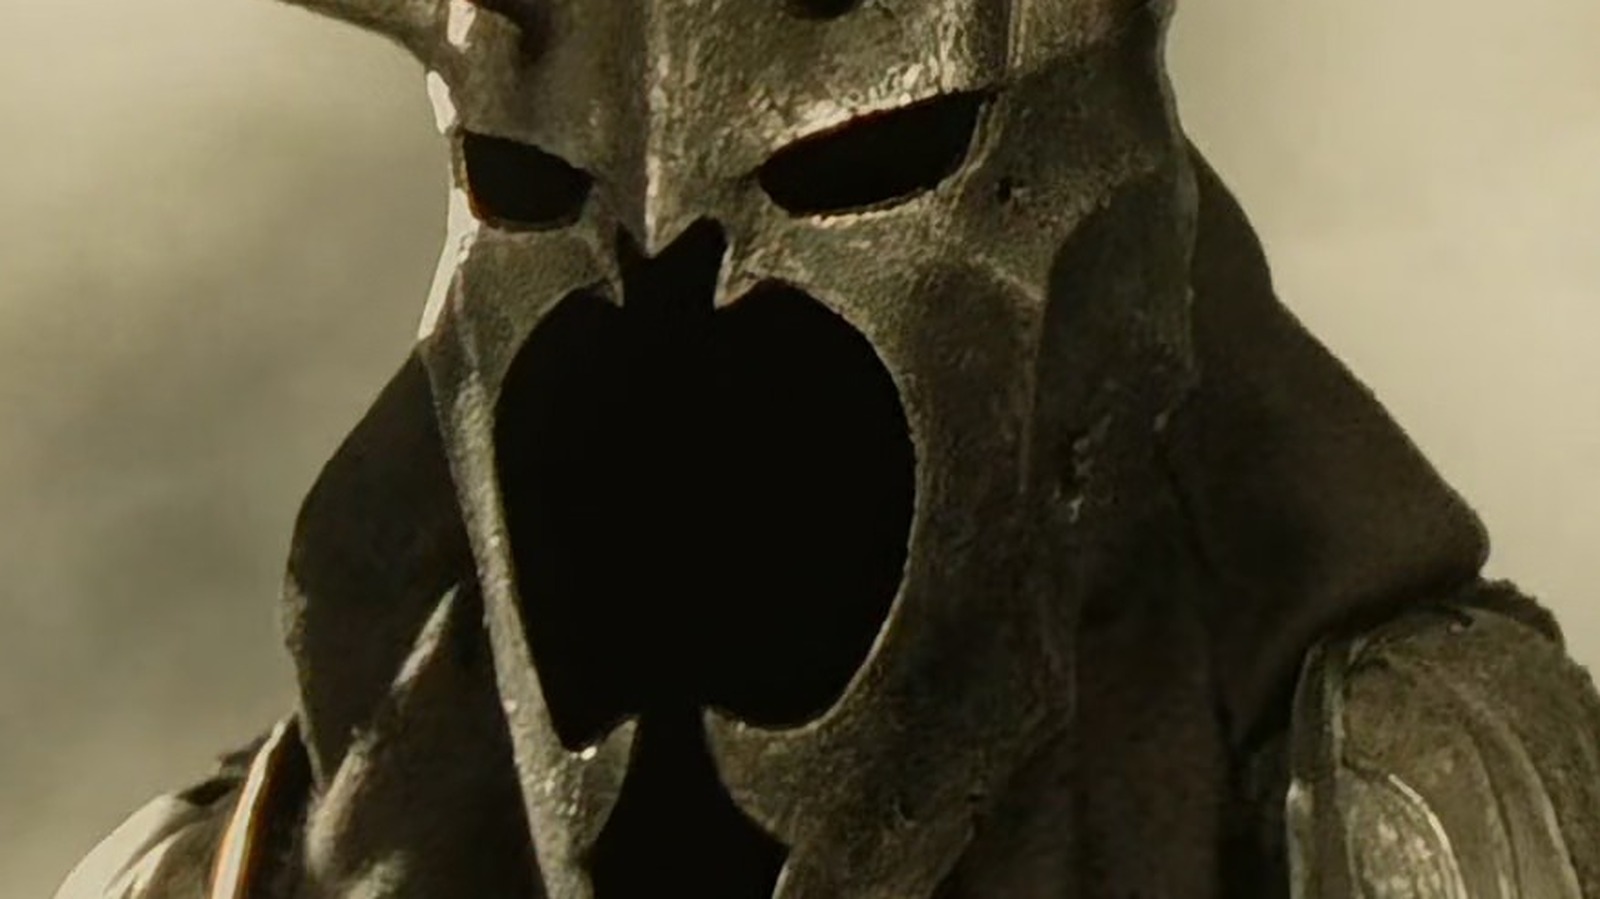 Sauron (The Rings of Power), Villains Wiki